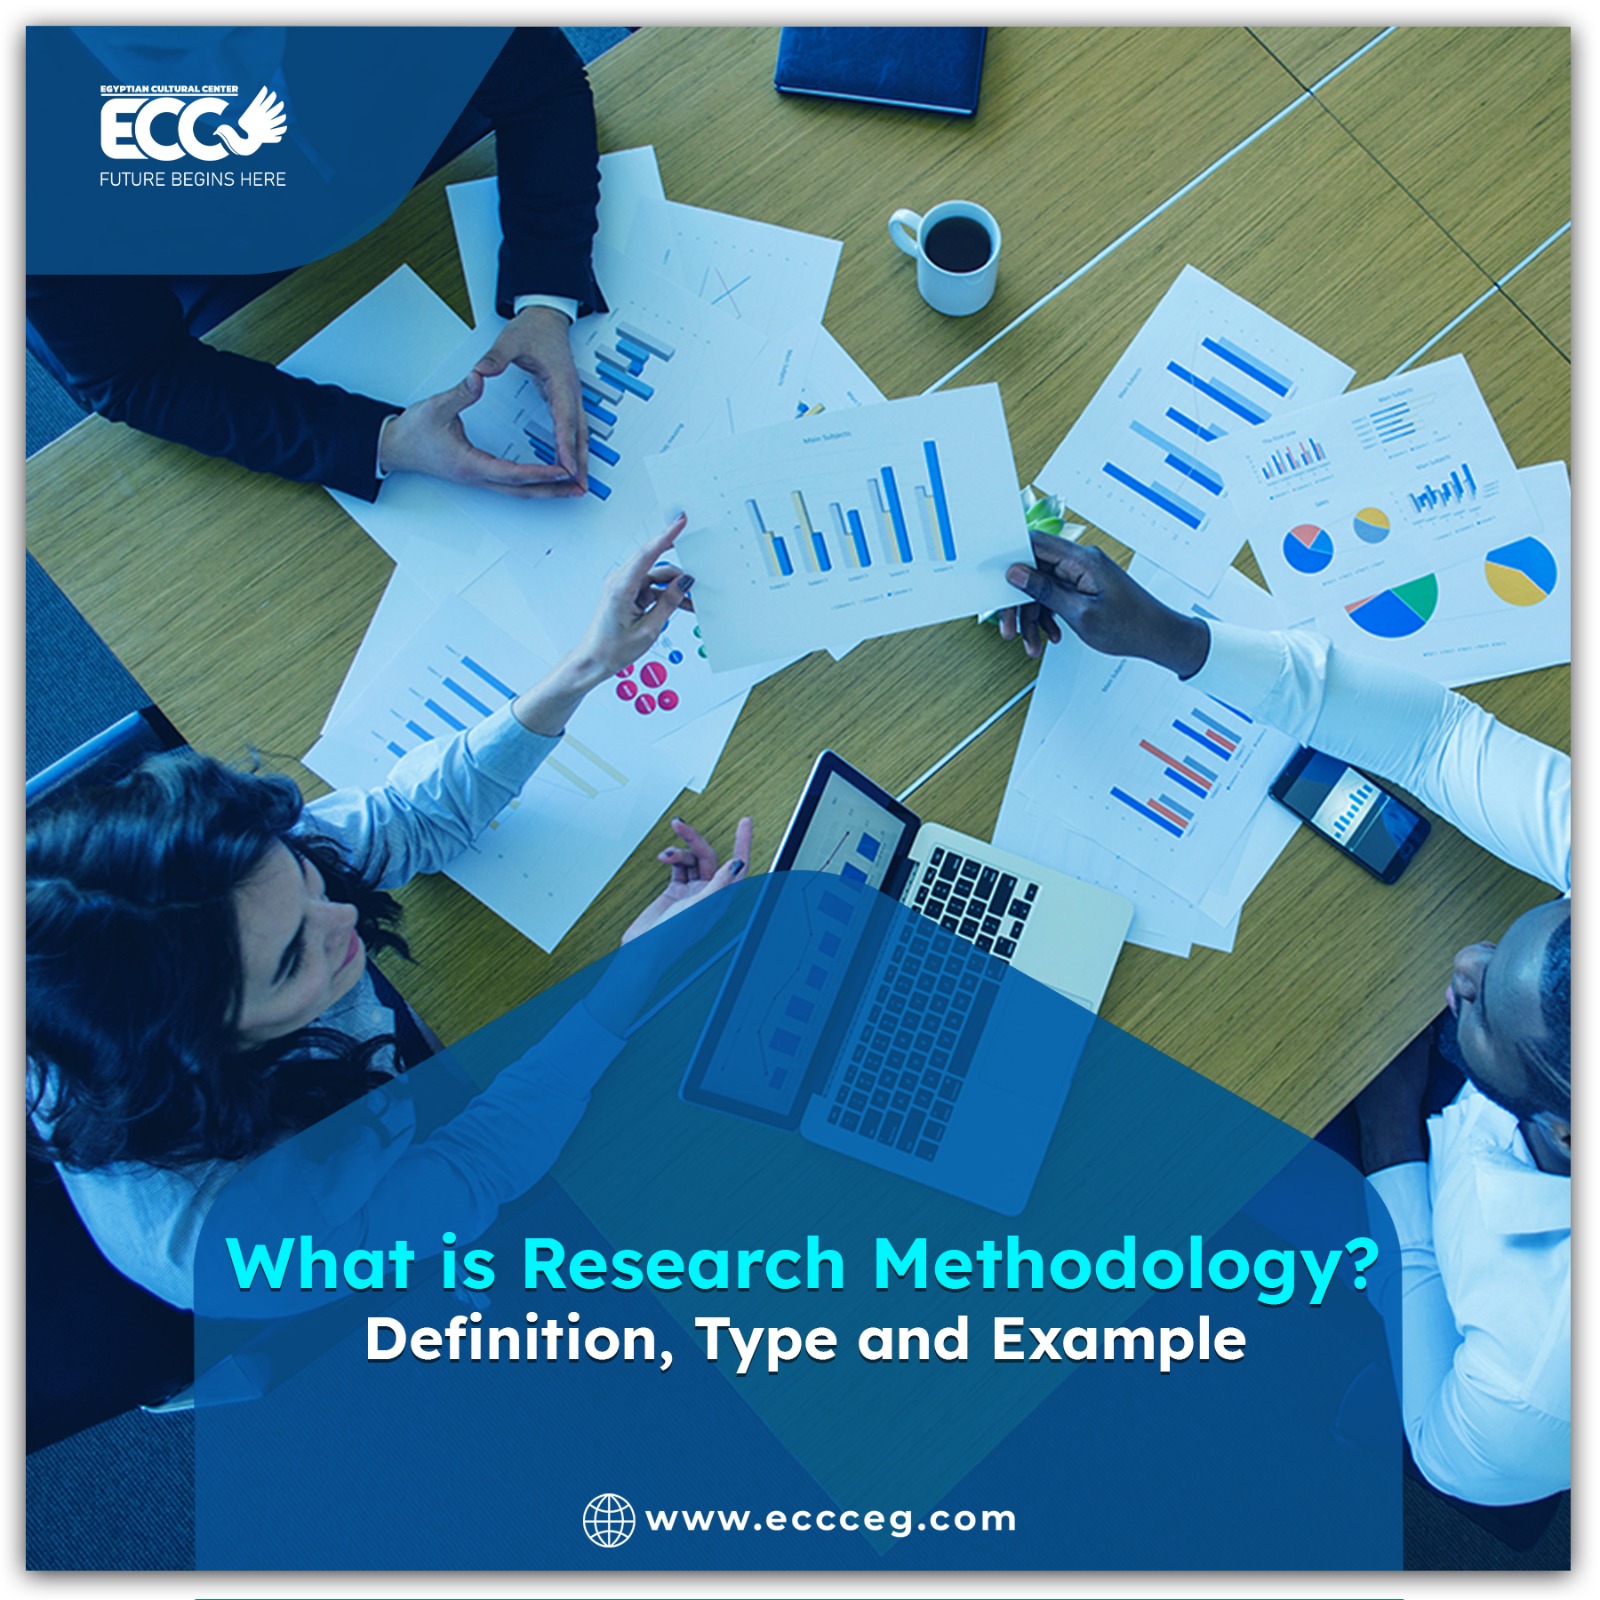 What is the Research Methodology? Definition, Types, and Examples